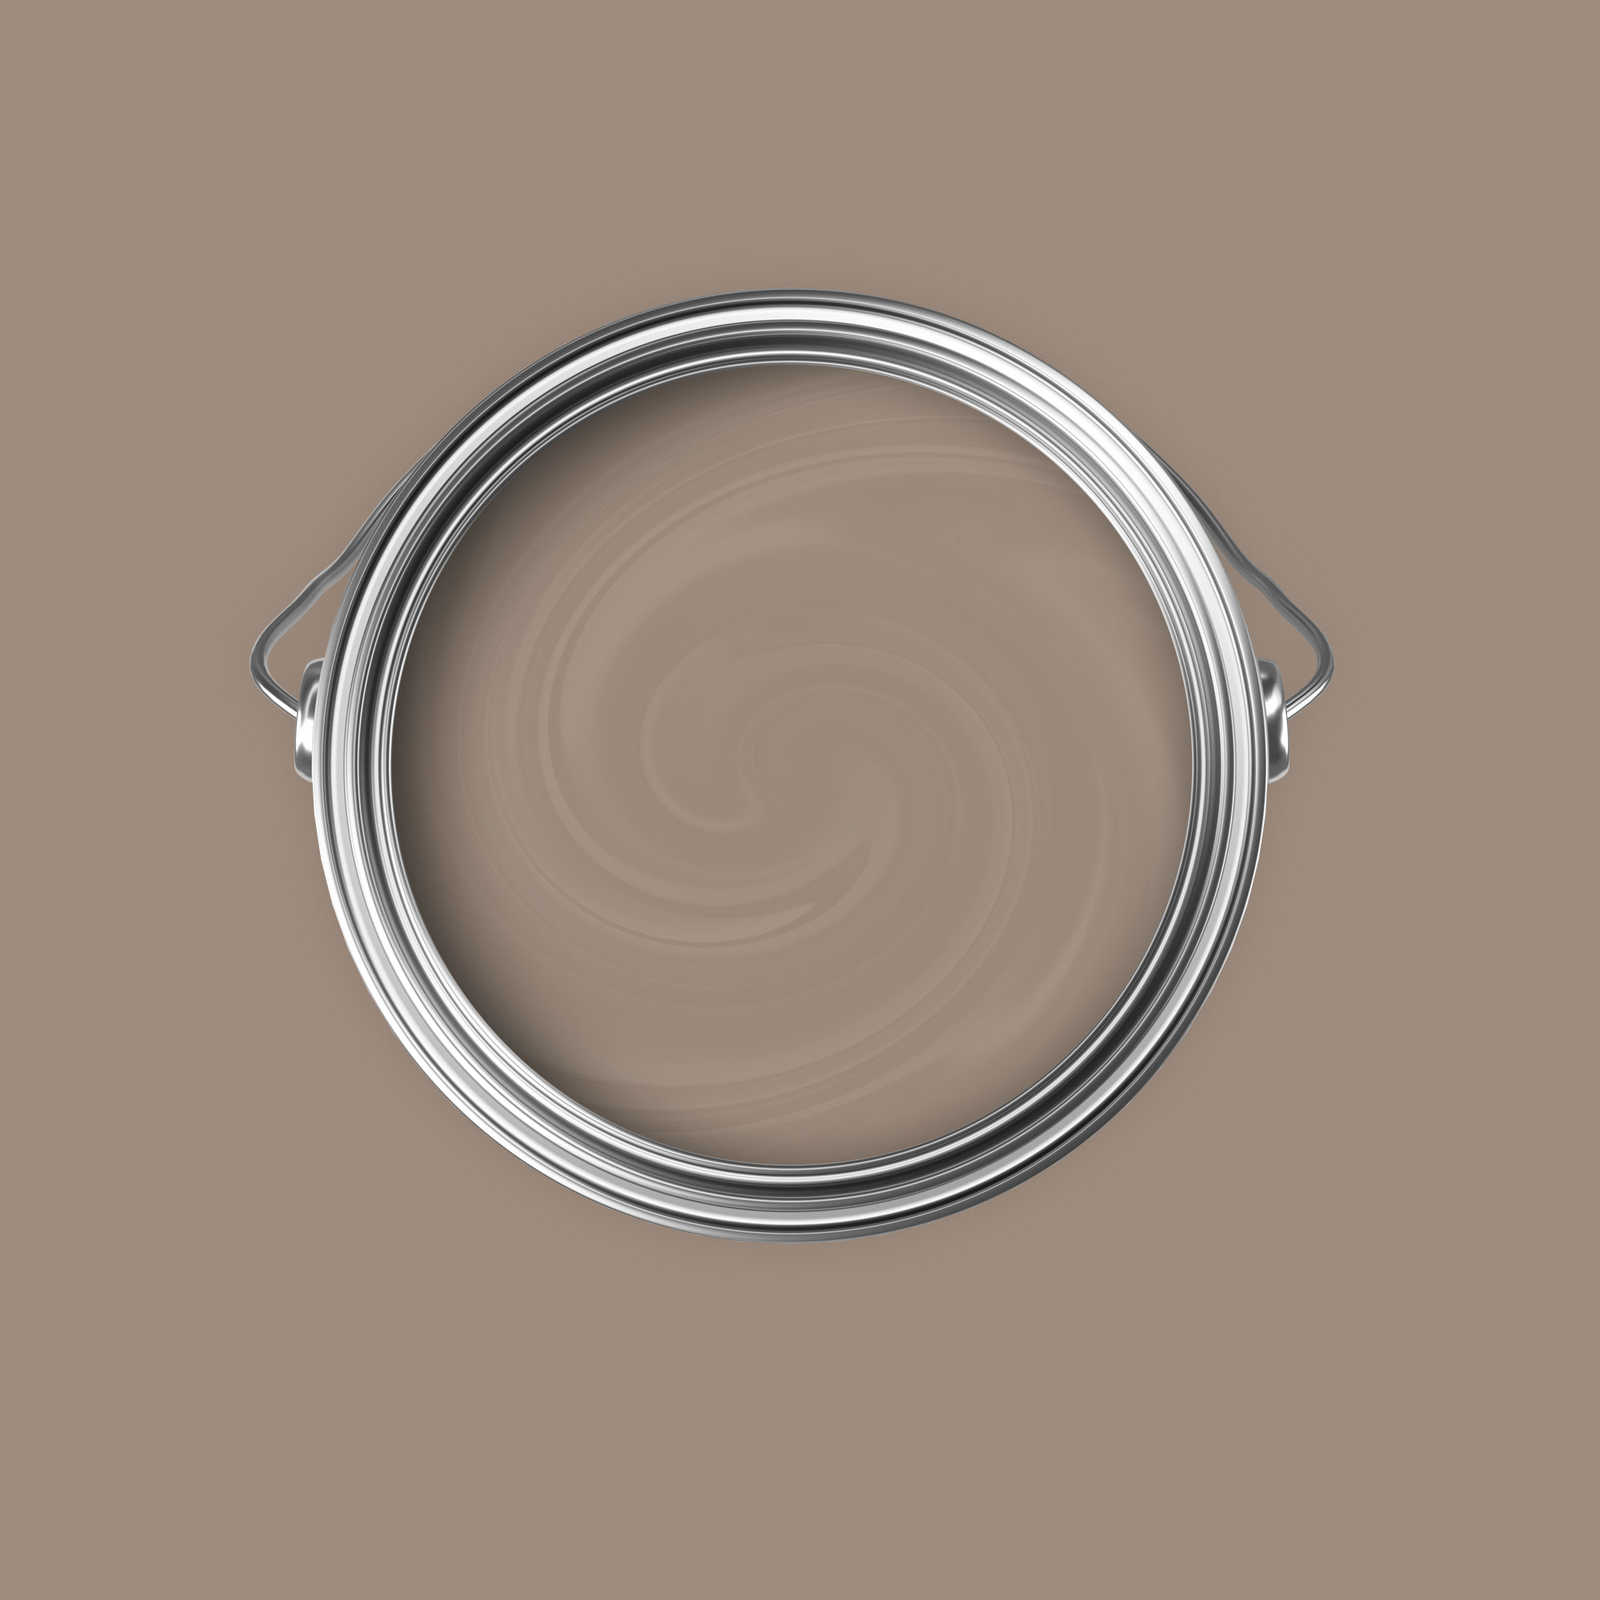             Premium Muurverf Down-to-earth Taupe »Talented calm taupe« NW702 – 5 liter
        